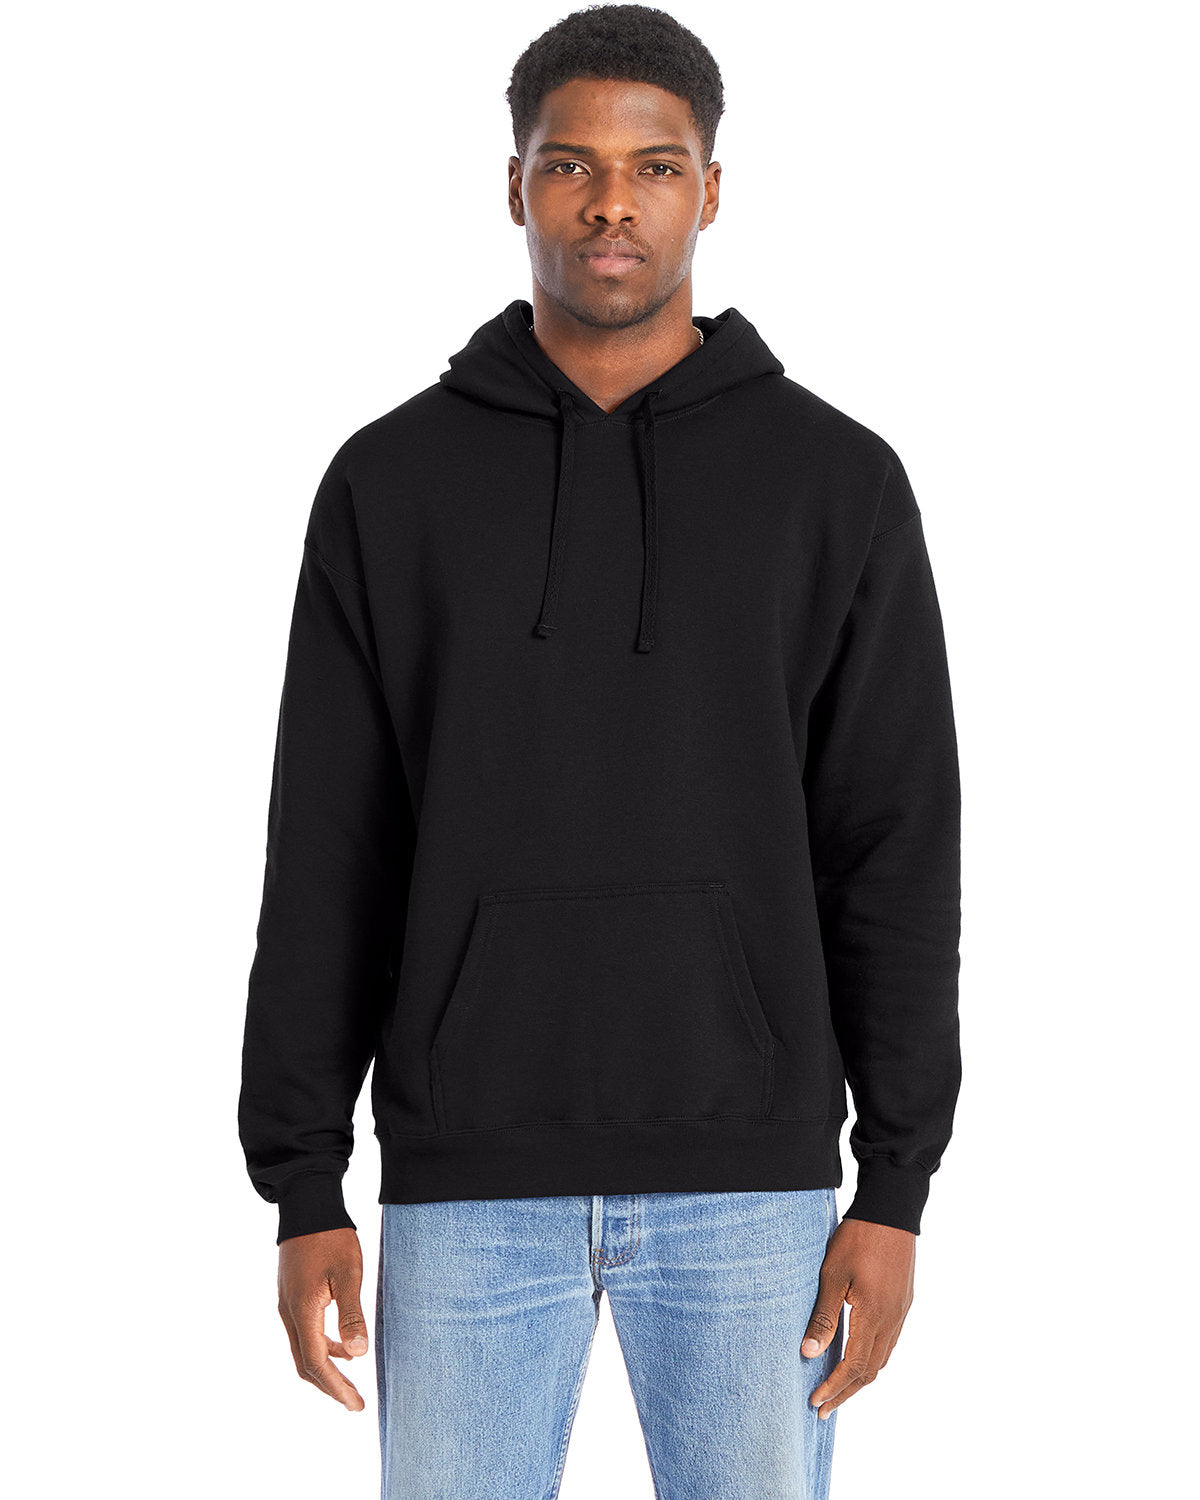 EXPERIENCE-SUPREME-COMFORT-WITH-THE-HANES-ADULT-PERFECT-SWEATS-PULLOVER-HOODED-SWEATSHIRT